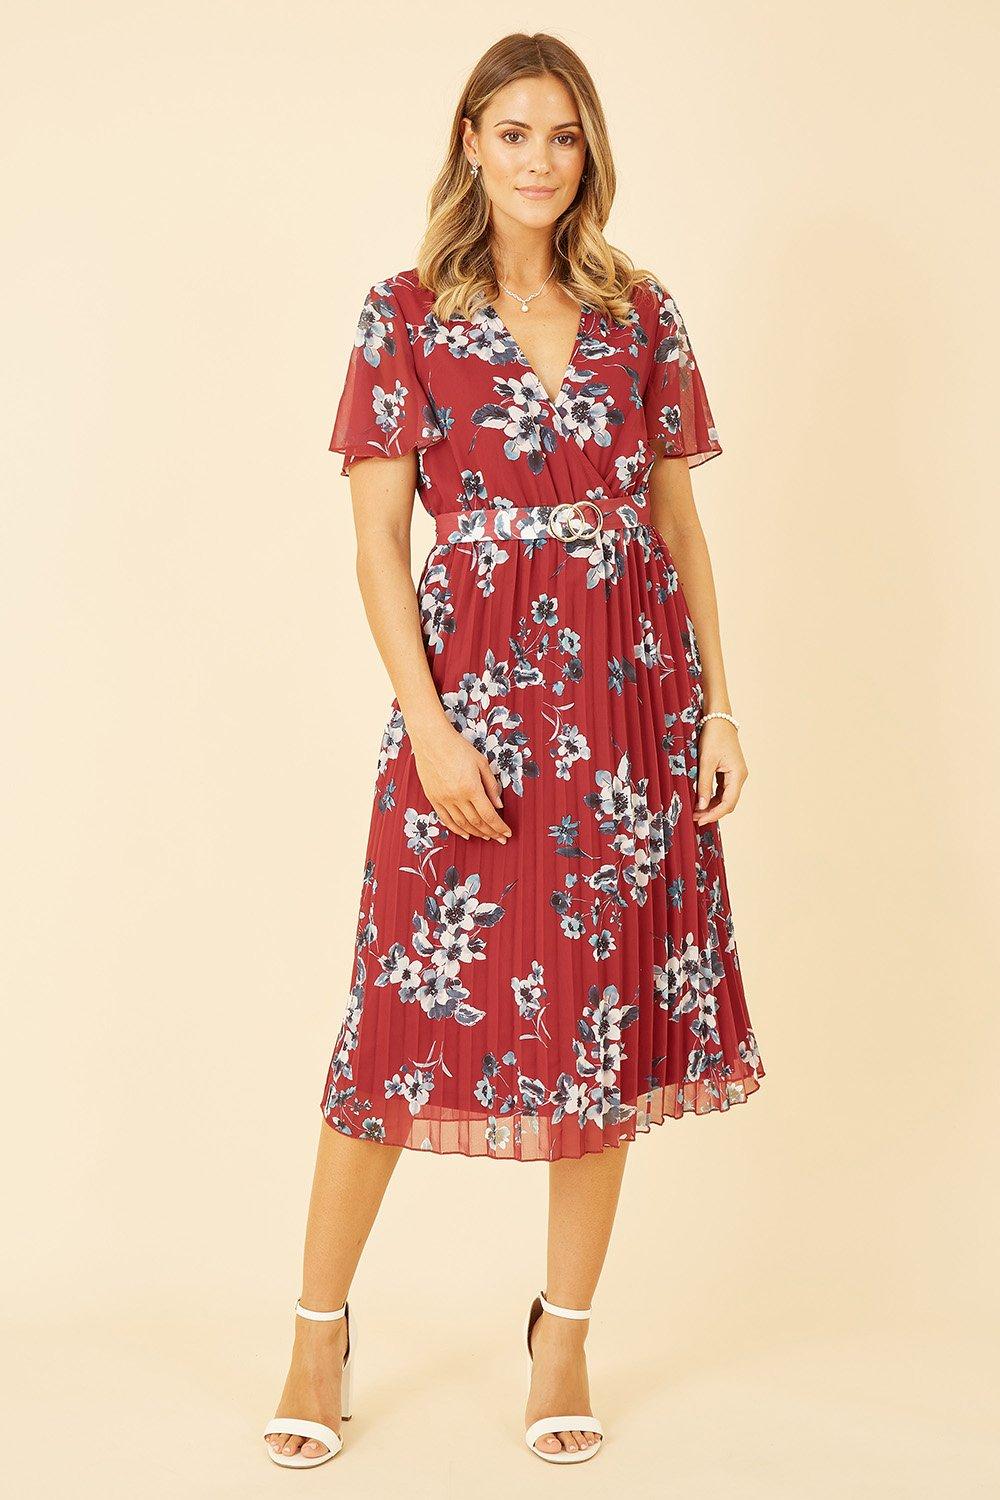 Red Floral Print Pleated Dress With Gold Buckle